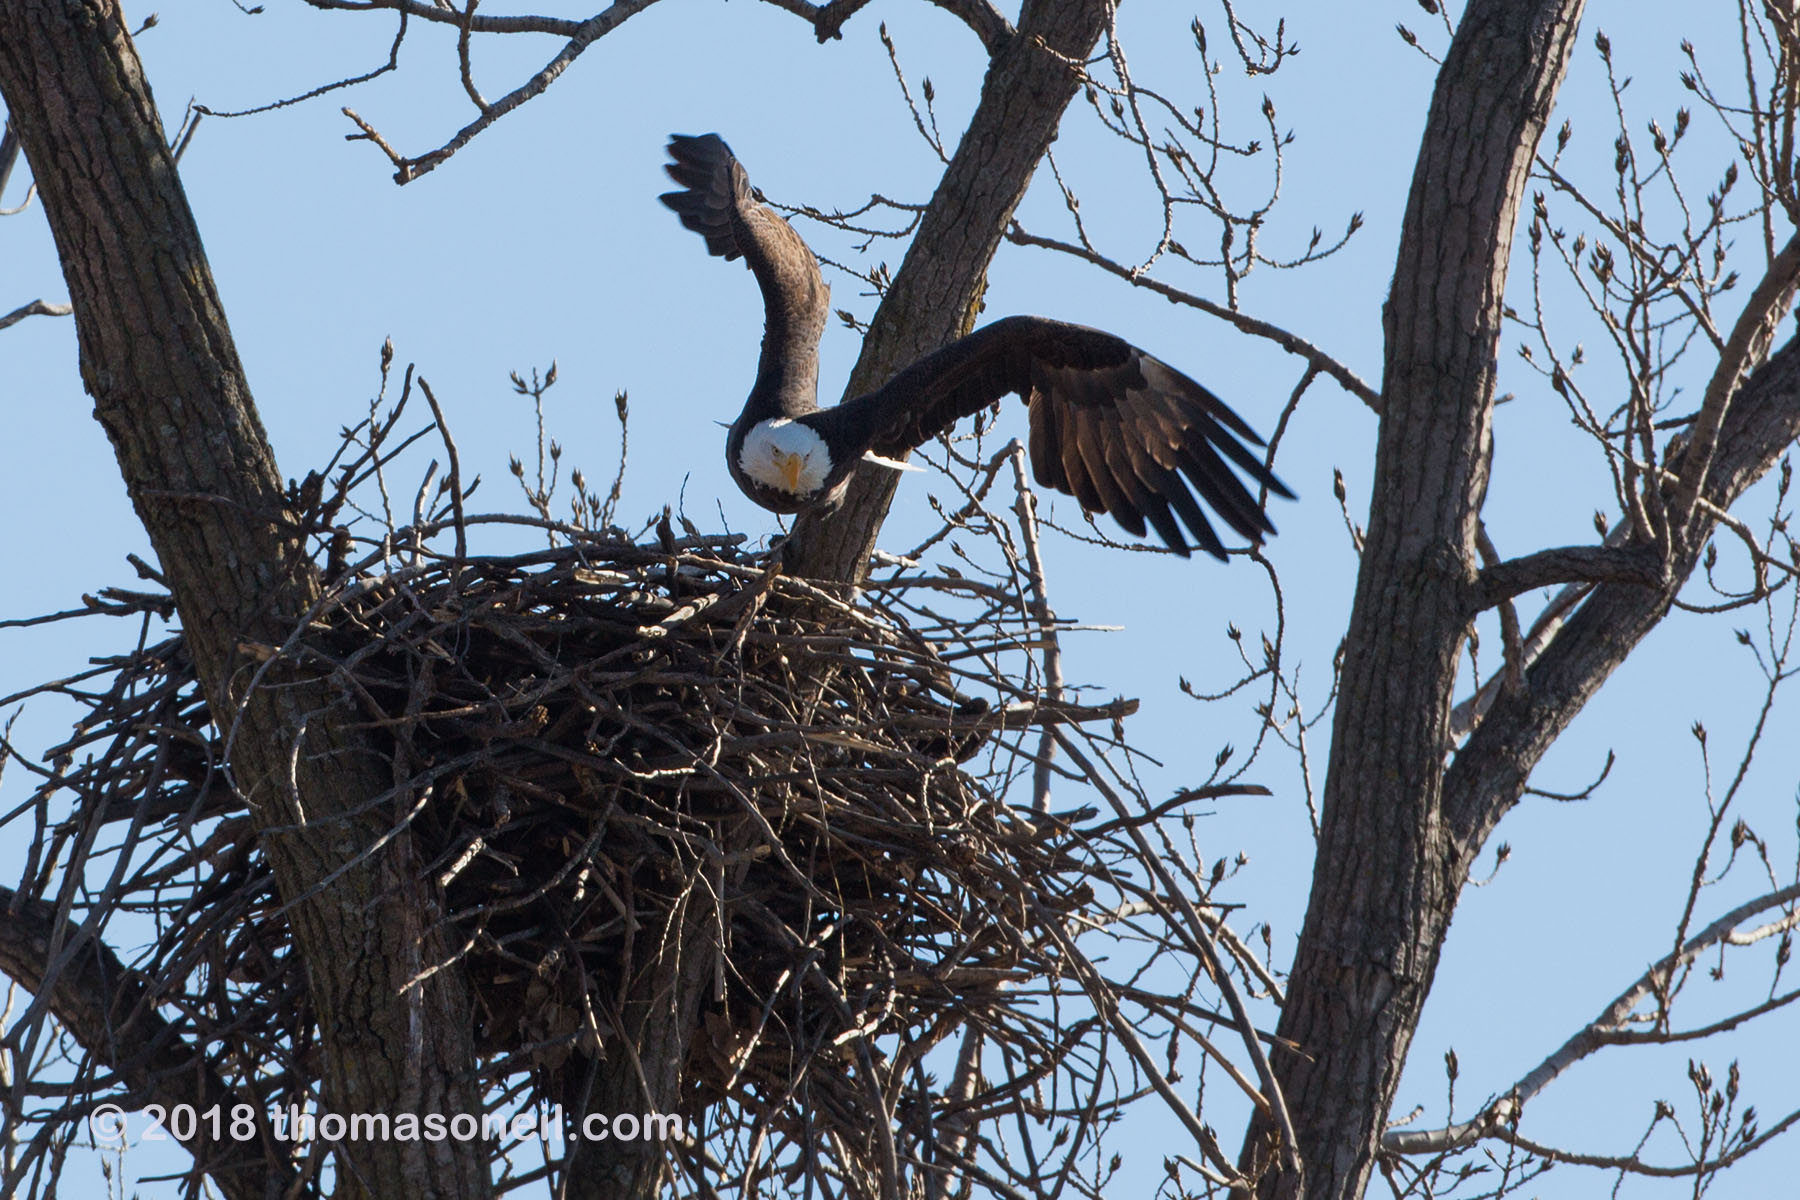 Bald eagle leaves the nest, Loess Bluffs National Wildlife Refuge, Missouri.  Click for next photo.